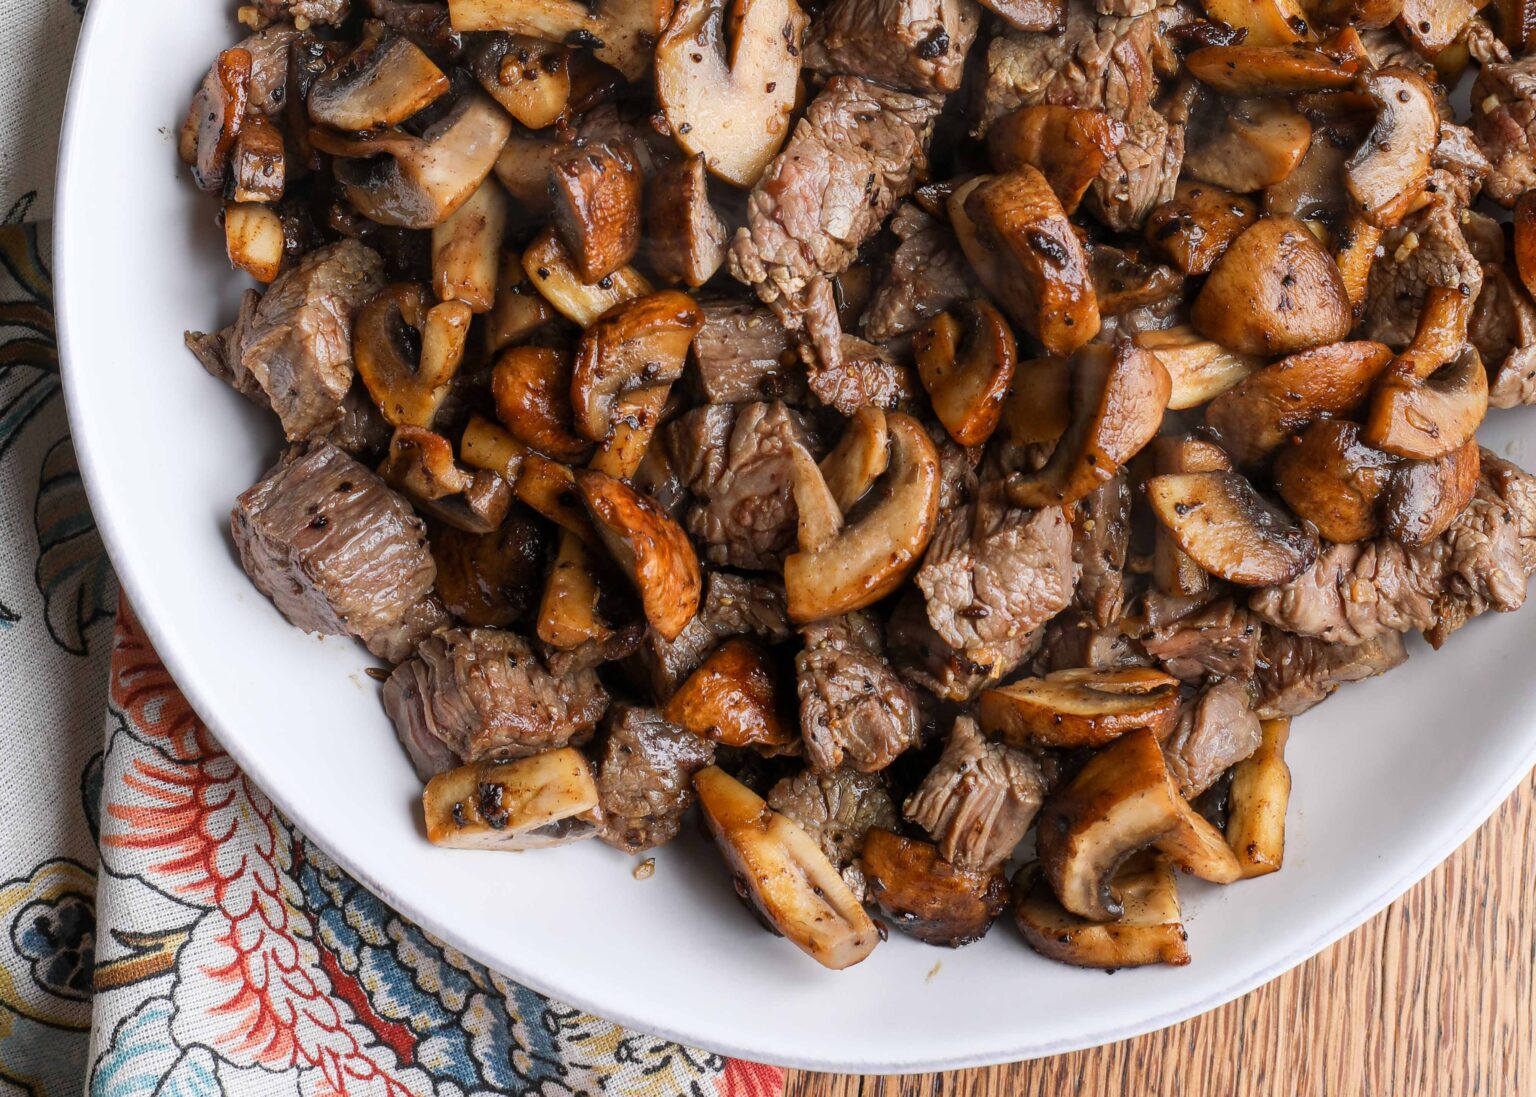 Buttered Steak Bites with Mushrooms